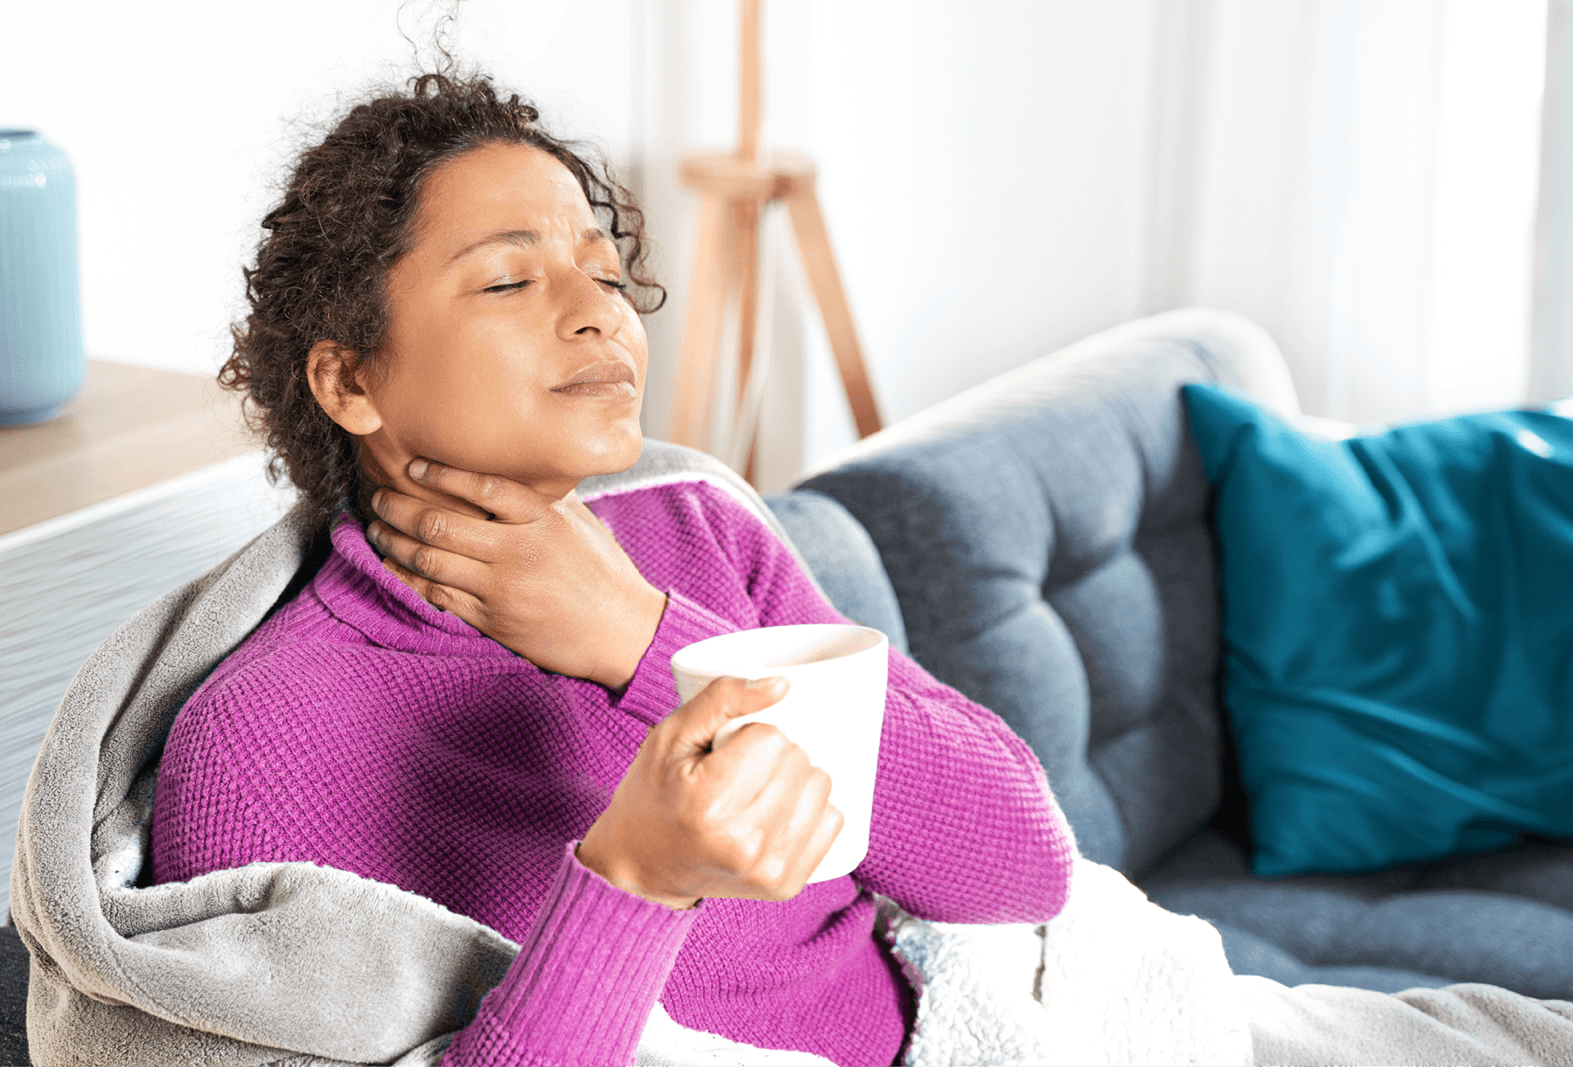 lady sat on couch with cup of tea holding sore throat